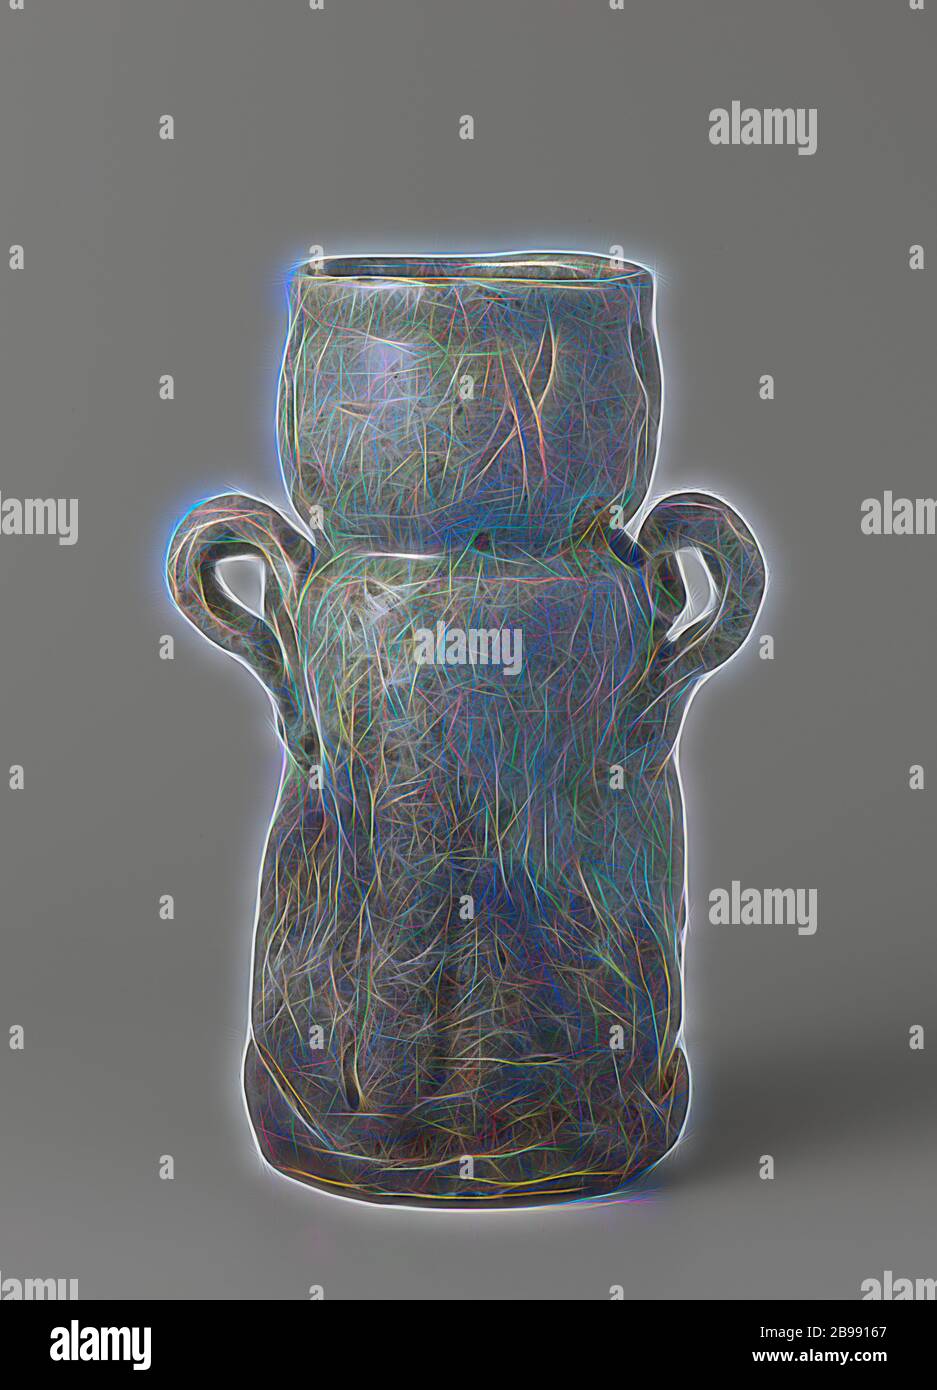 Vase with a green glaze and two handles, Vase of stoneware with two ears on the shoulder, partially covered with a celadon green glaze. The abdomen is dented and four times an engraved cross on the neck. The lower part of the vase is unglazed. Old trader's label on the bottom with 'N.V. Hammer - Far Eastern Art New York / 440 '. I go., anonymous, Japan, c. 1600 - c. 1699, Edo-period (1600-1868), stoneware, glaze, vitrification, h 26.7 cm d 10.5 cm d 14.1 cm d 11.8 cm l 17.5 cm, Reimagined by Gibon, design of warm cheerful glowing of brightness and light rays radiance. Classic art reinvented wi Stock Photo